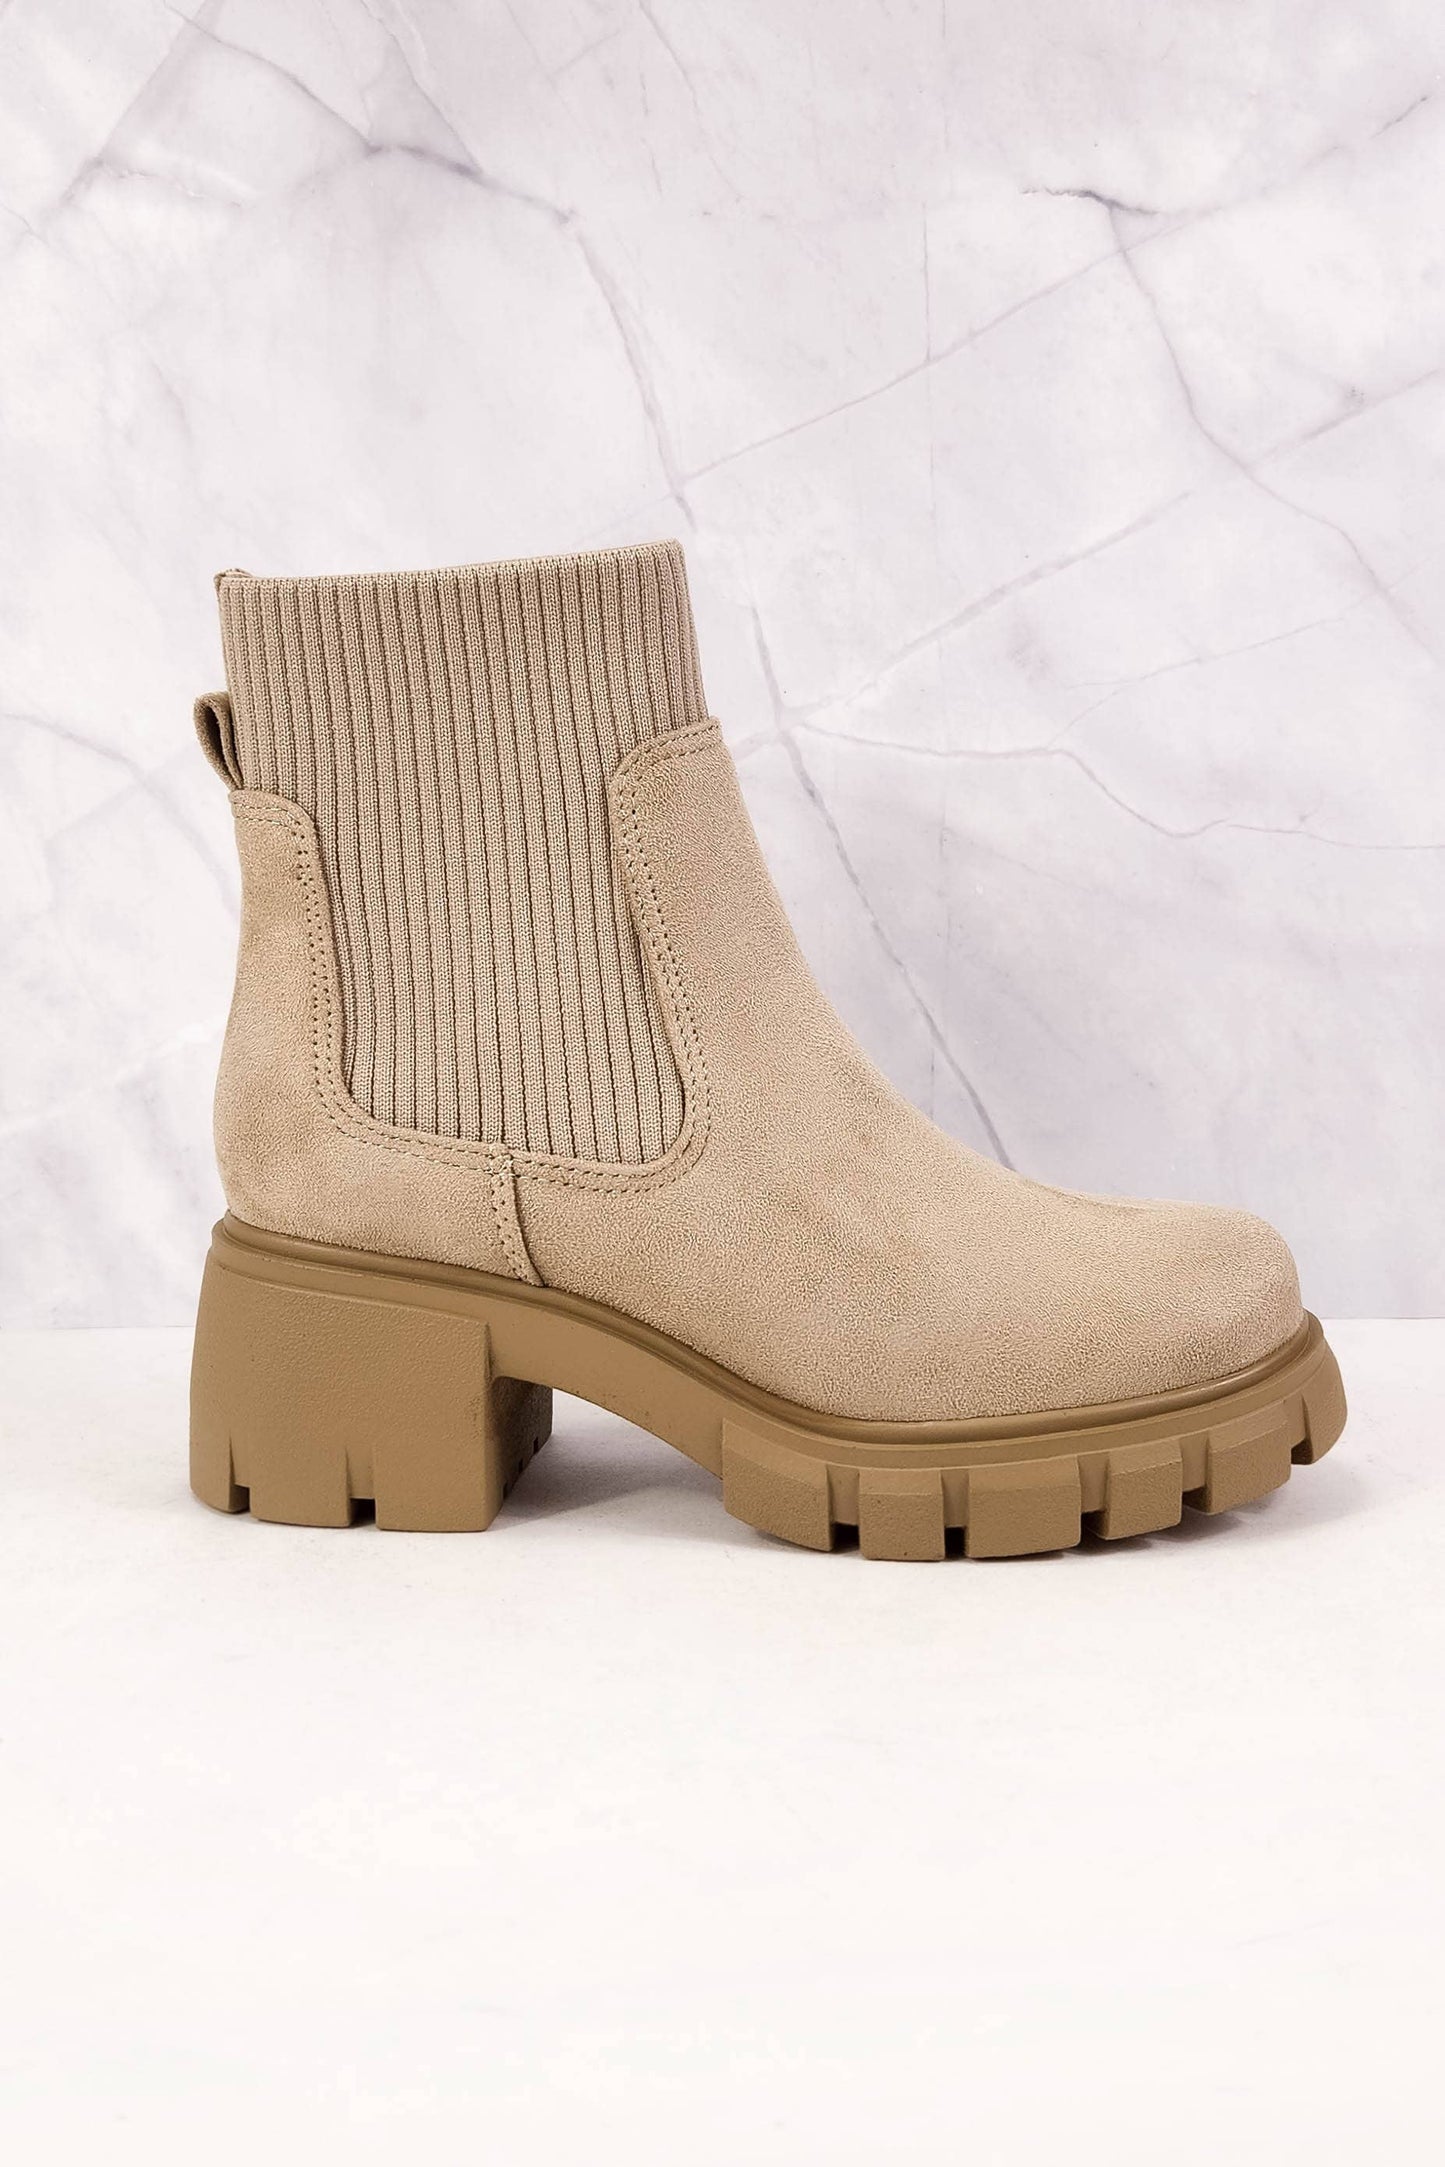 CCOCCI- Zordy Chelsea Boots